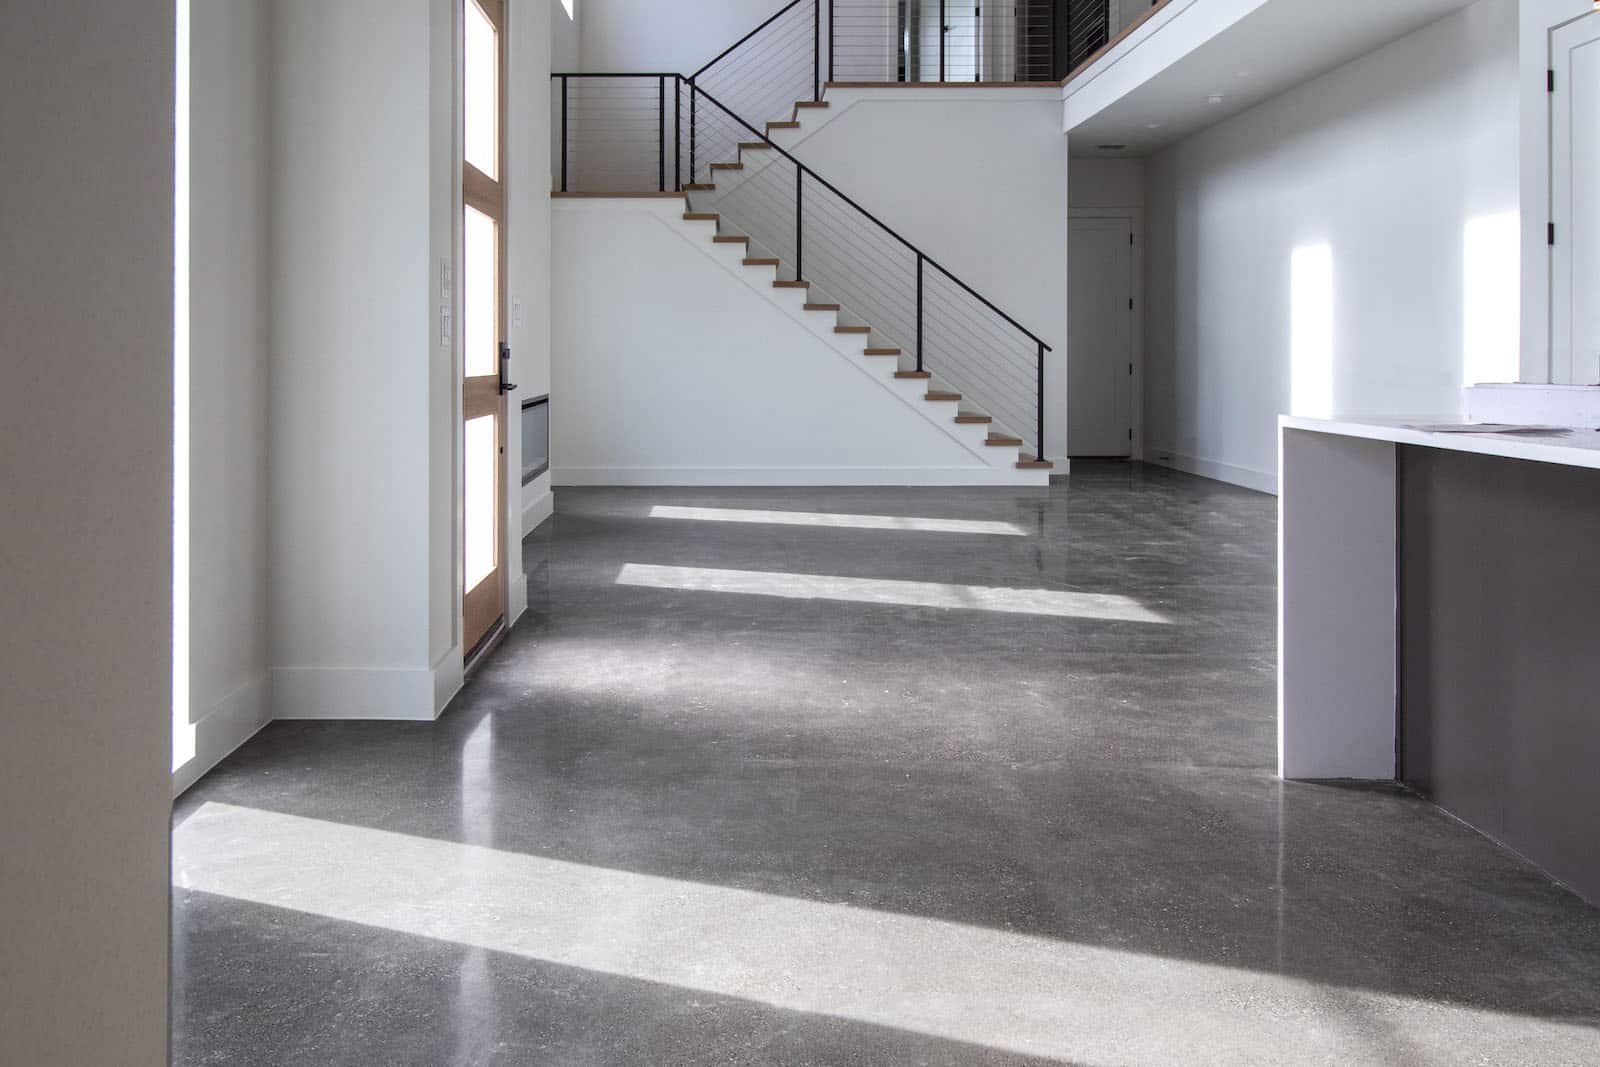 Frequently Asked Questions About Stained Concrete Floors